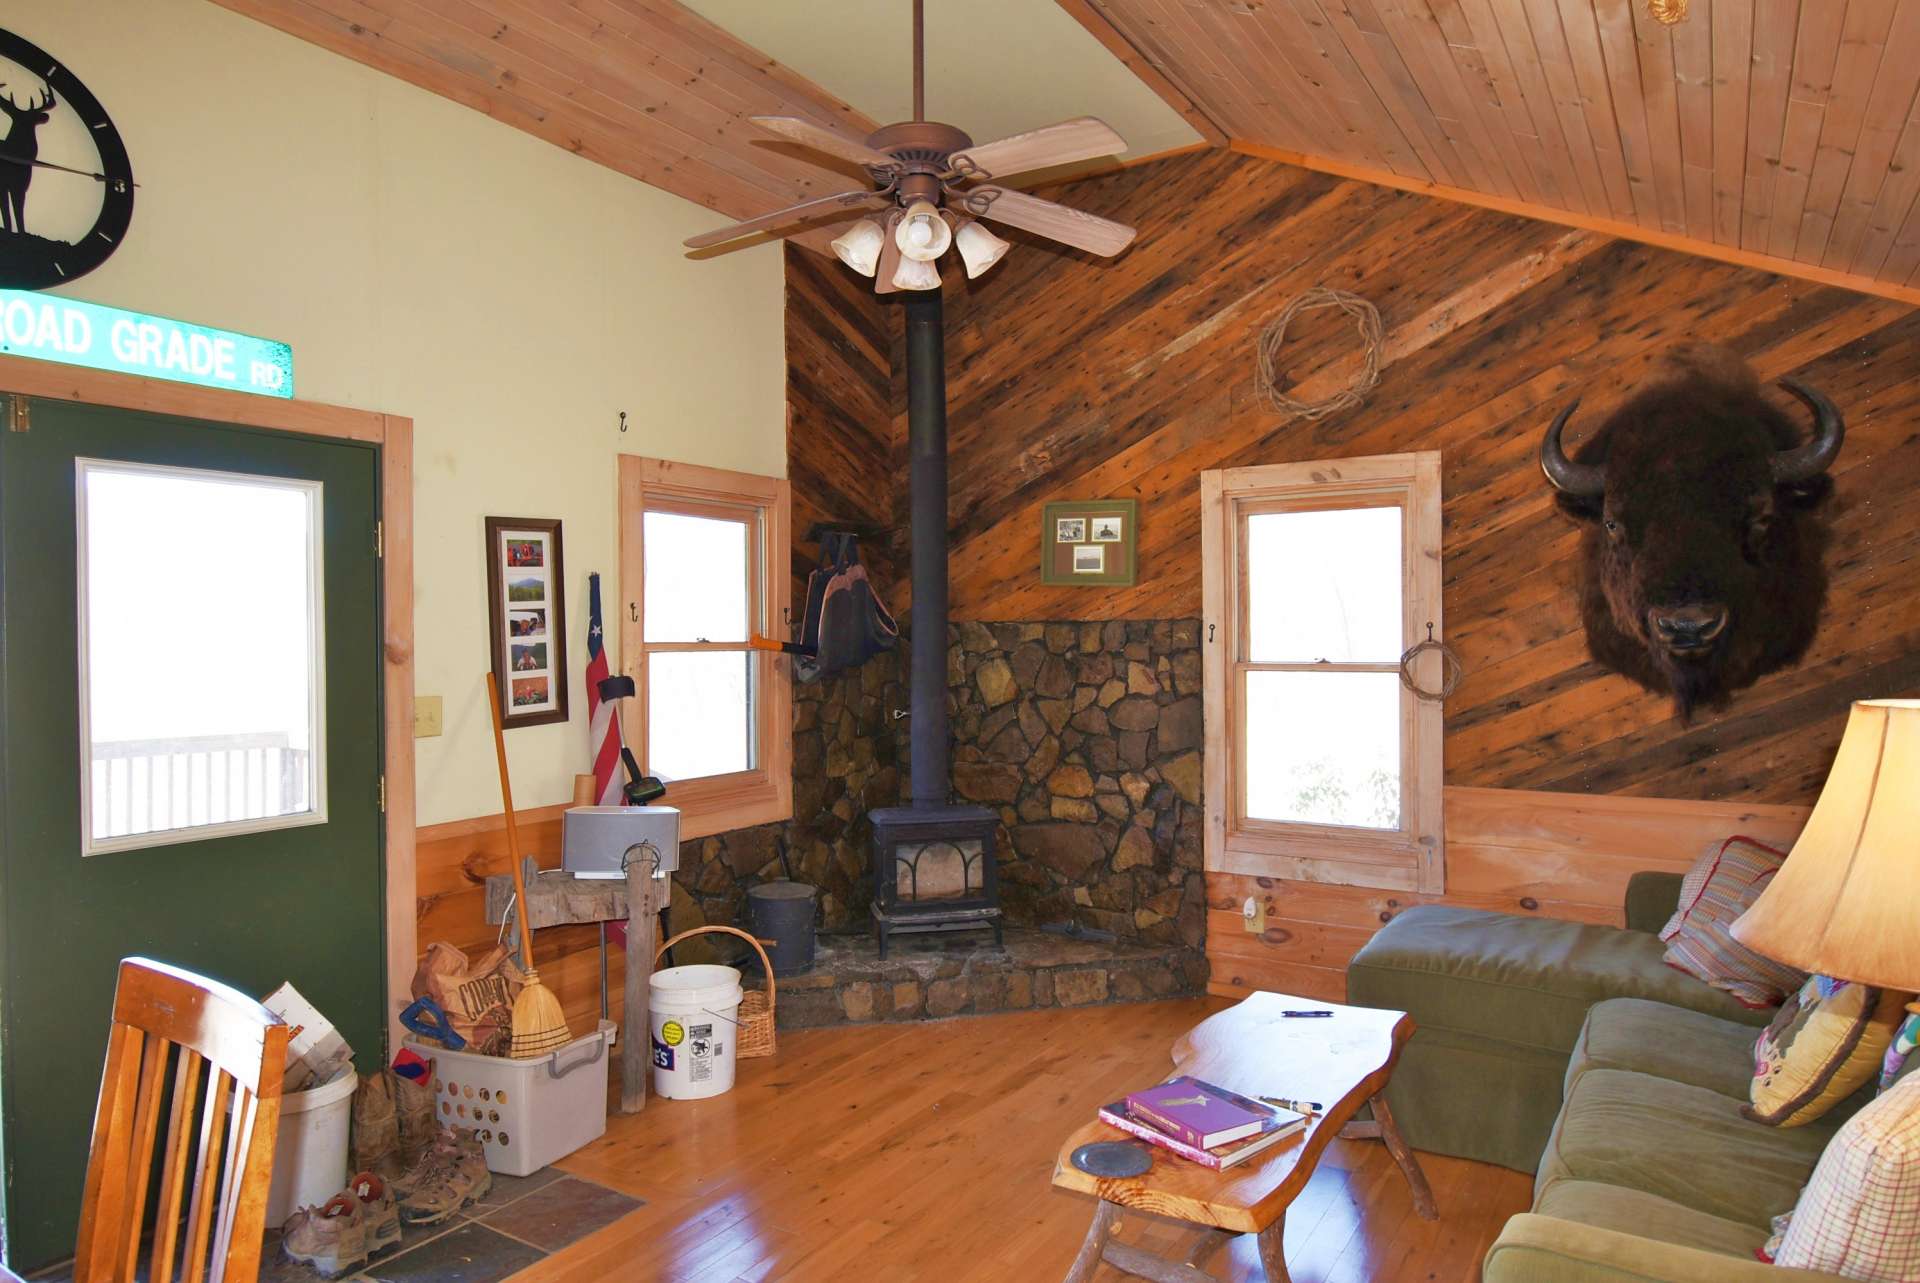 The partially vaulted living area features wood floors, and a wood burning stove for warmth on cool evenings in the NC Mountains.